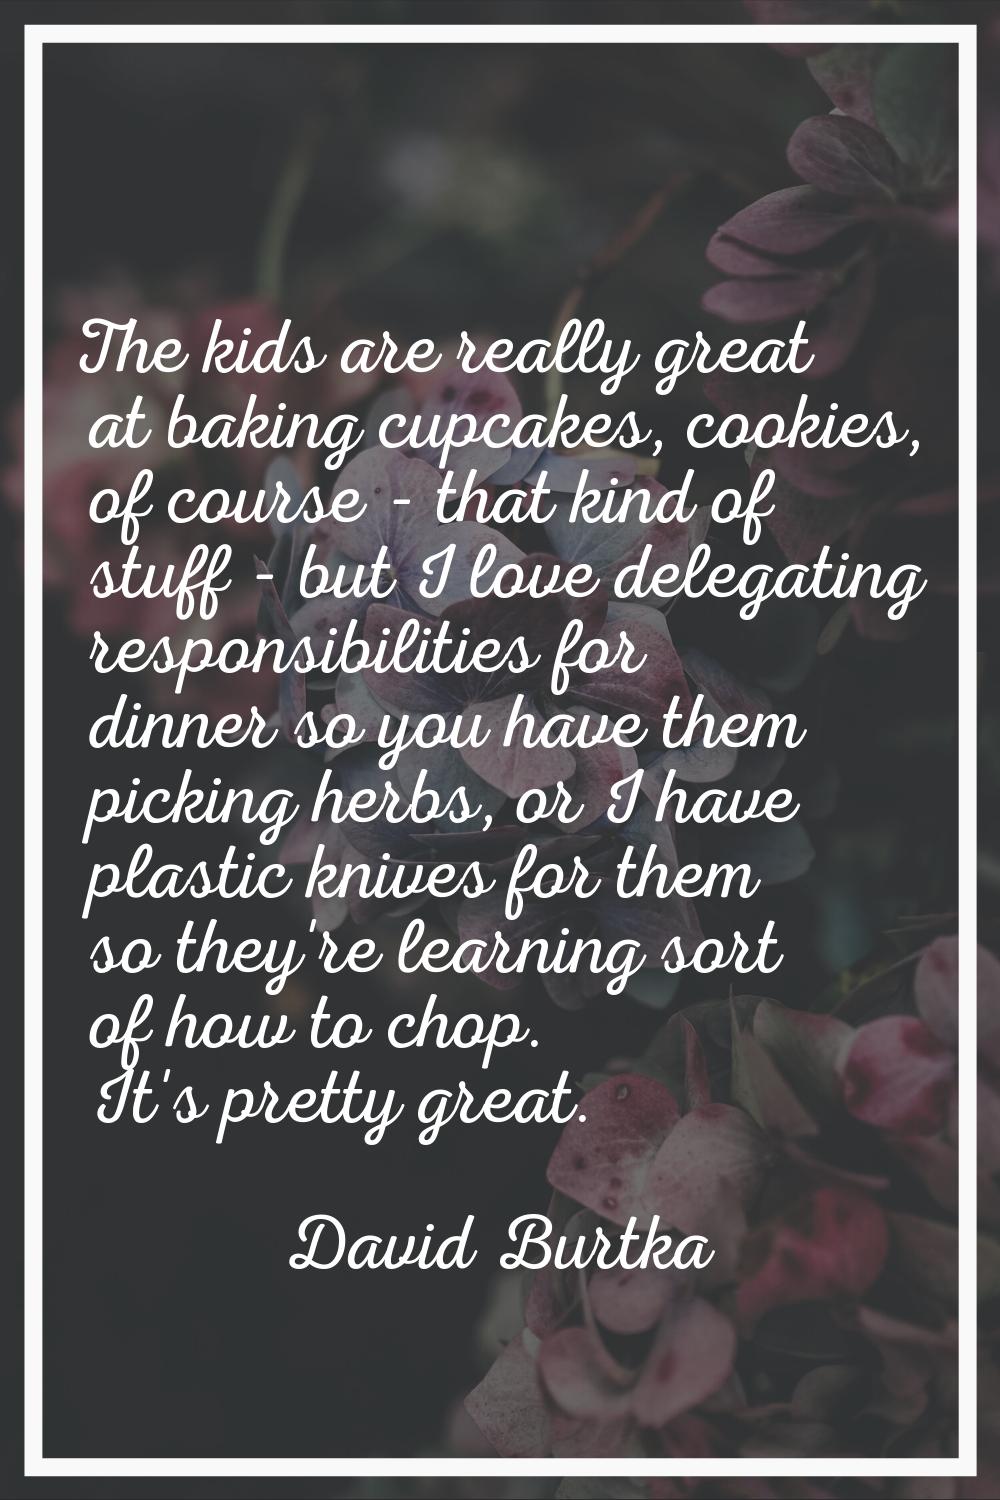 The kids are really great at baking cupcakes, cookies, of course - that kind of stuff - but I love 